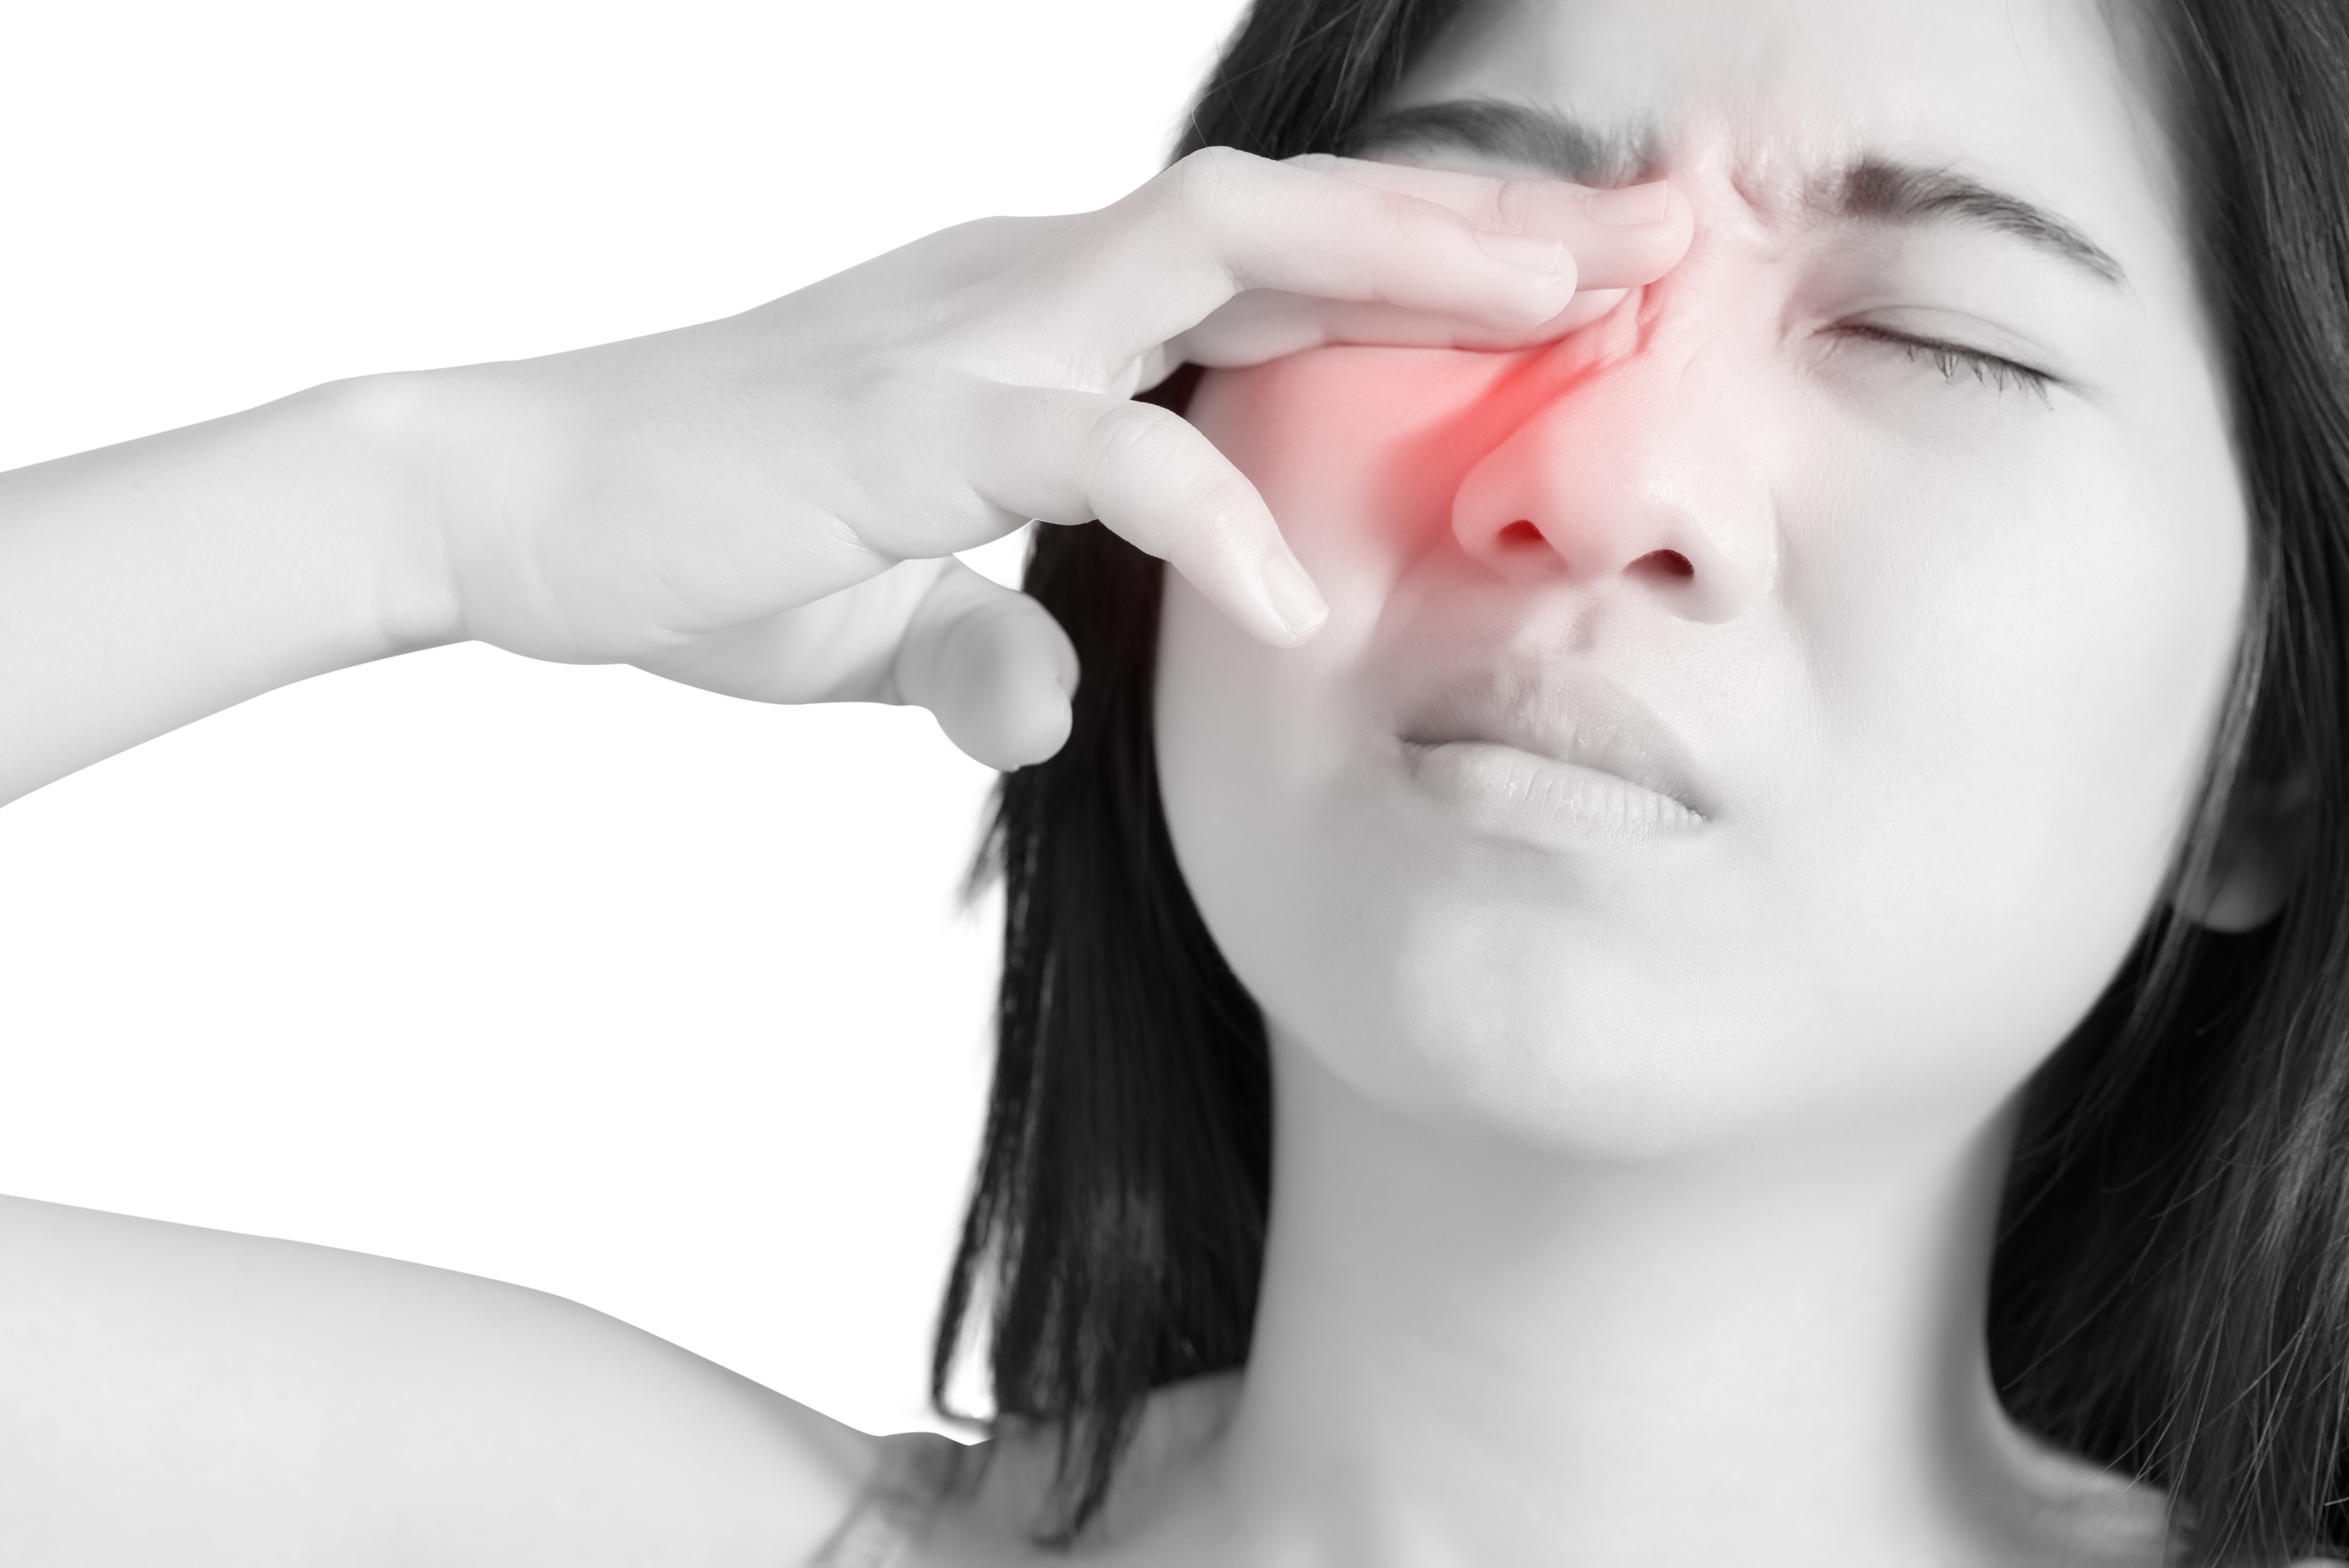 8 Common Causes of Eye Pain - Better Vision Guide